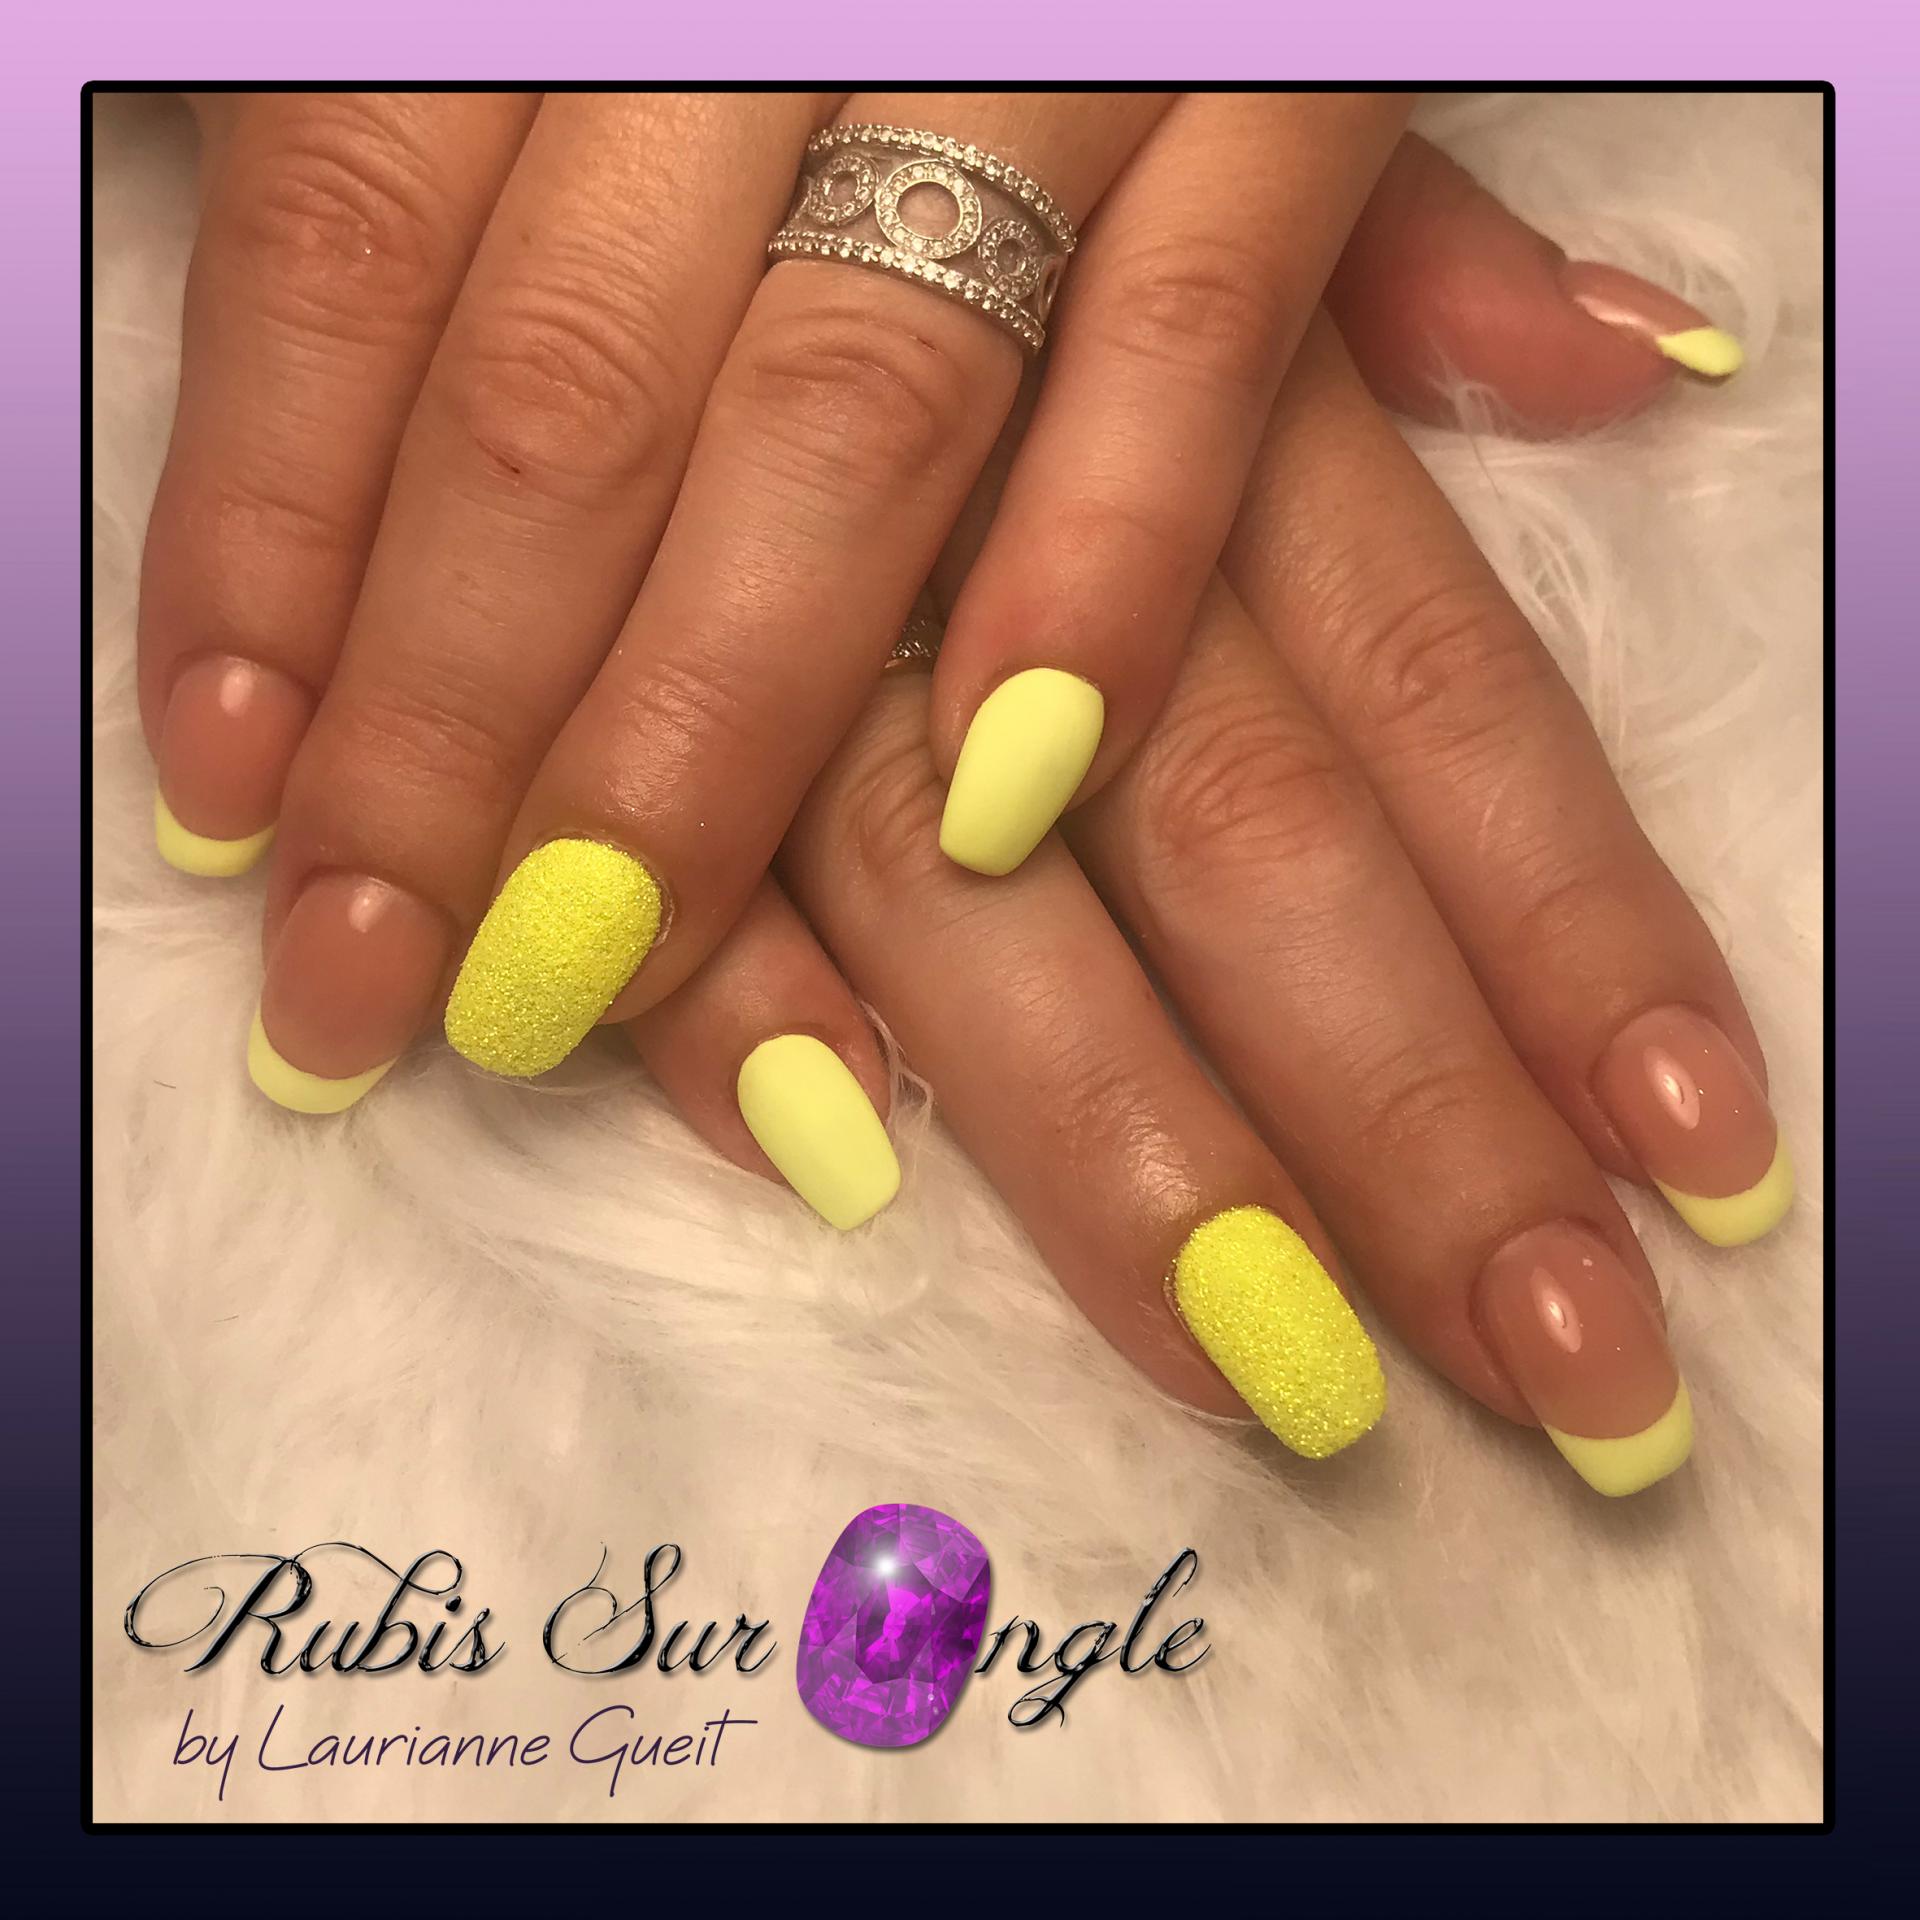 Rubis-Sur-Ongle-Nail-Art-French-Jaune-Effet-Sucre